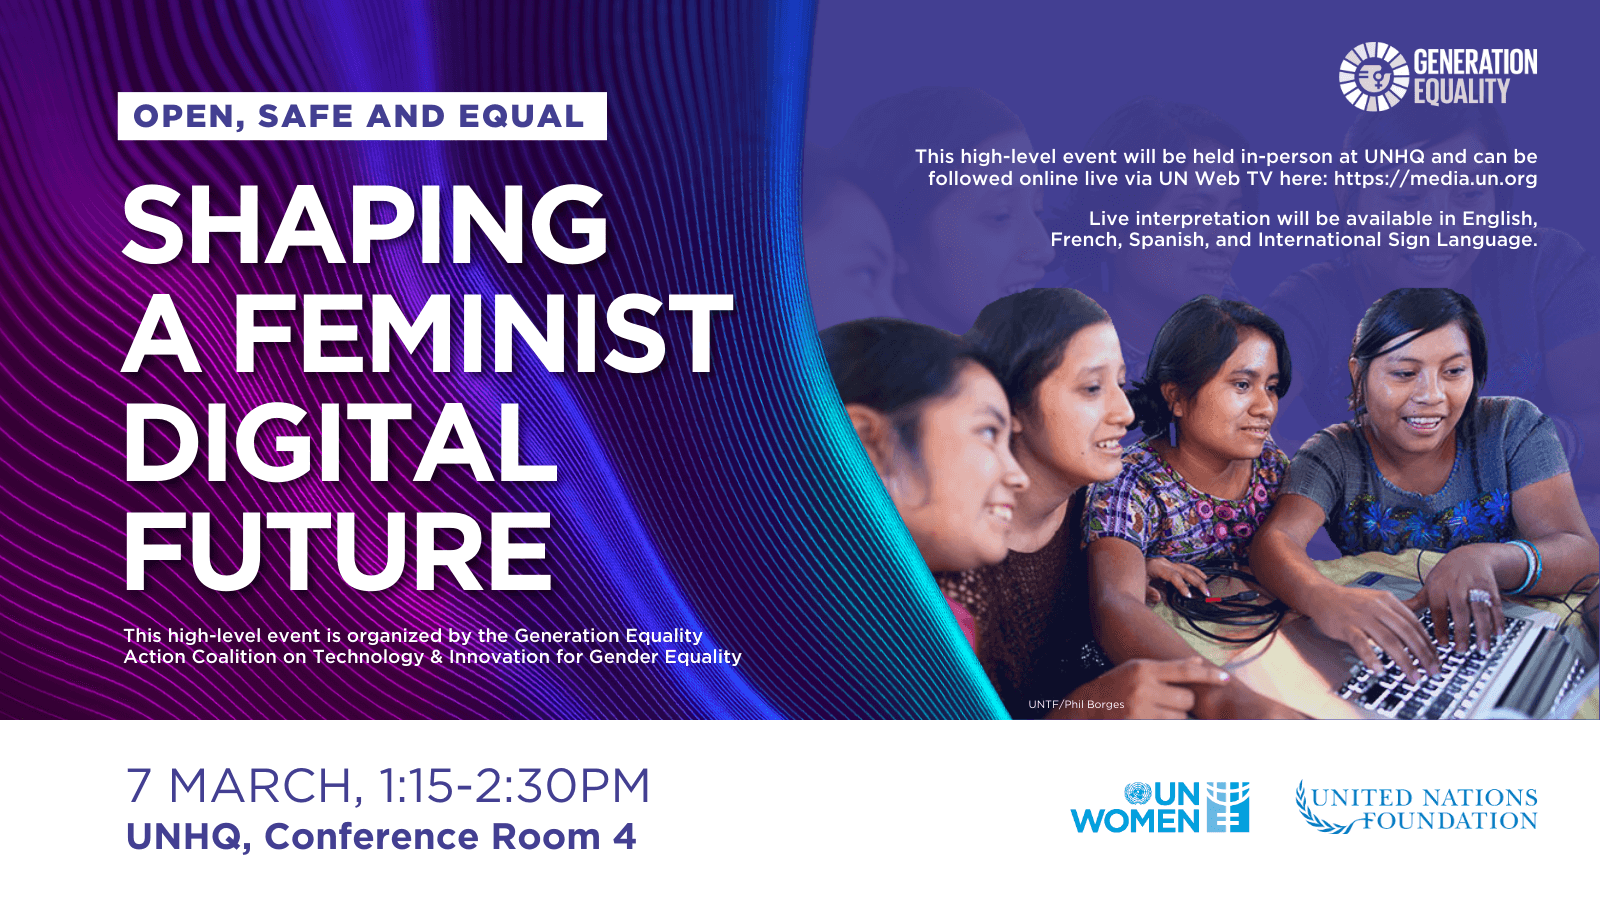 Open, safe and equal—Shaping a feminist digital future